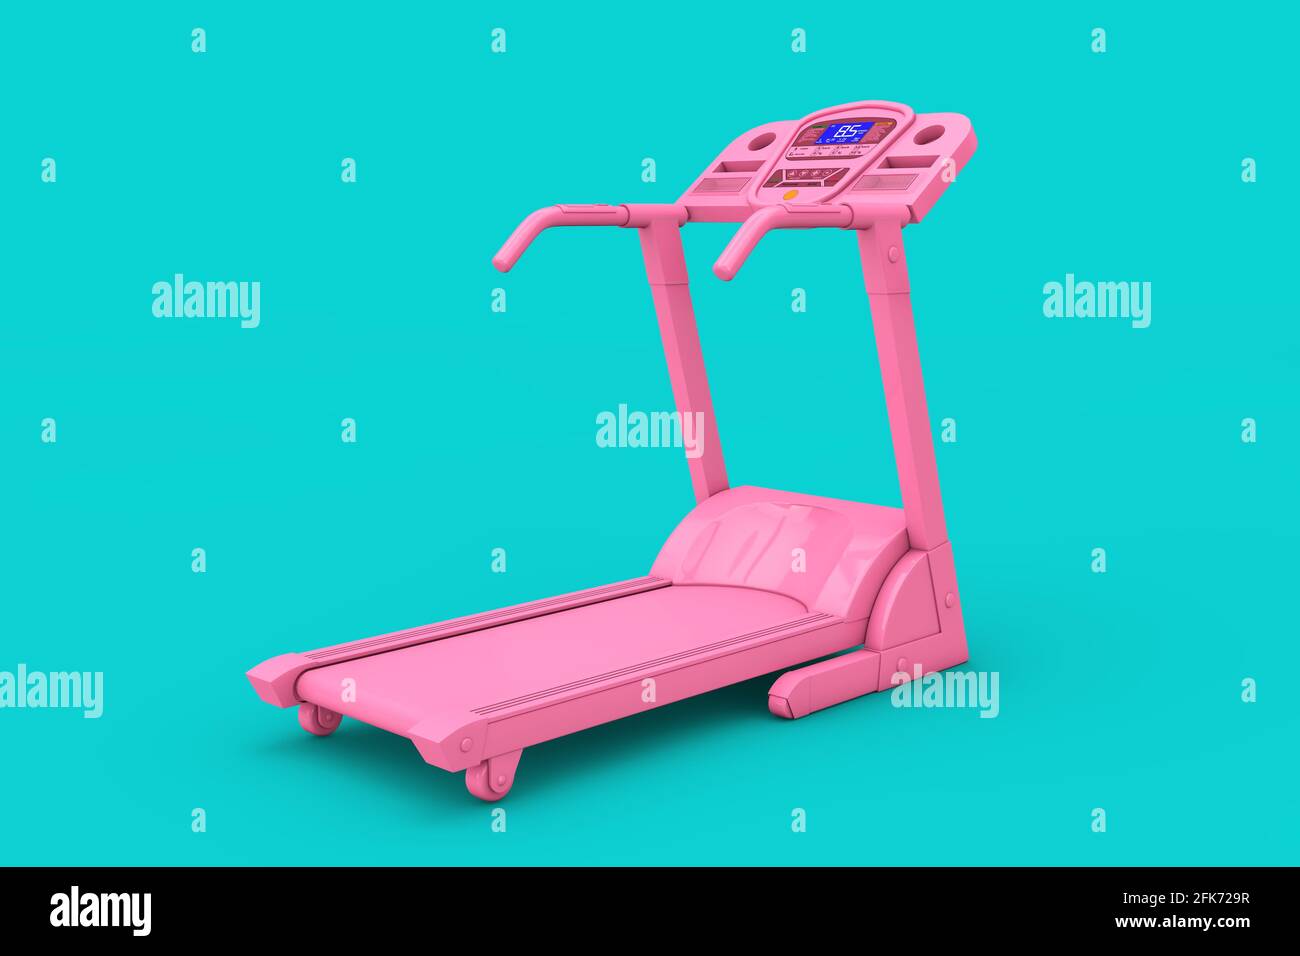 Pink Treadmill Fitness Run Machine in Duotone Style on a blue